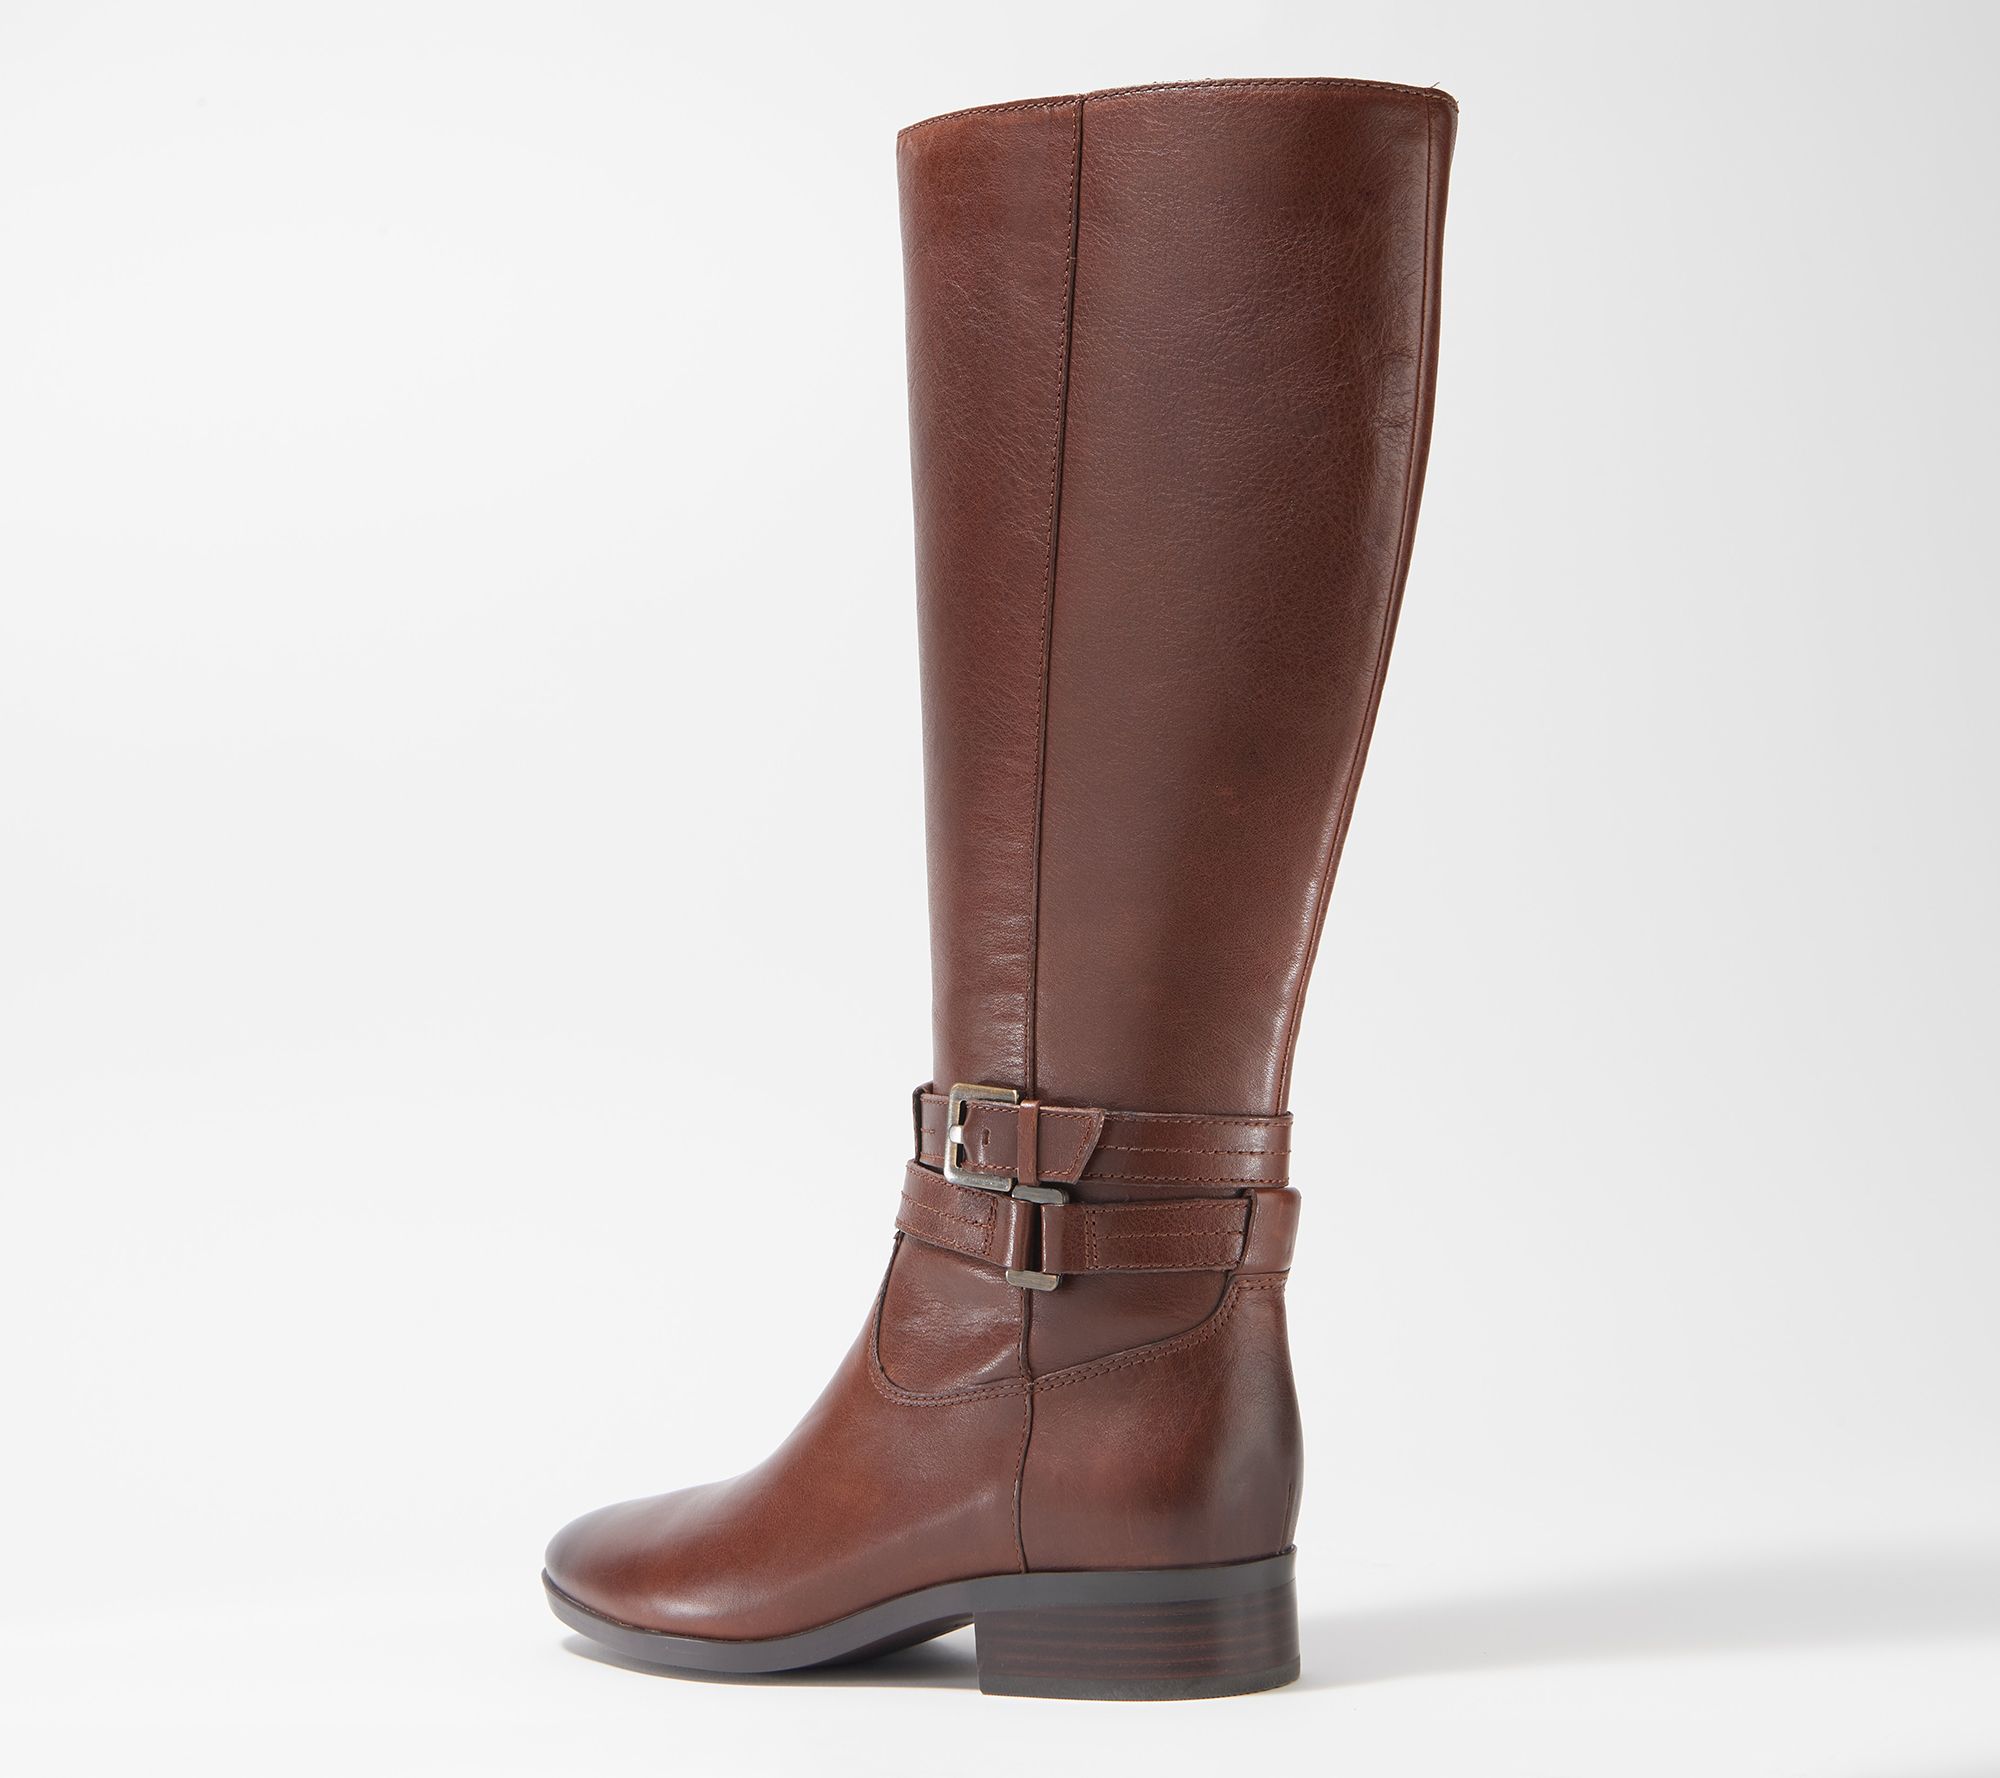 Naturalizer Wide Calf Leather Tall Riding Boot - Reid - QVC.com